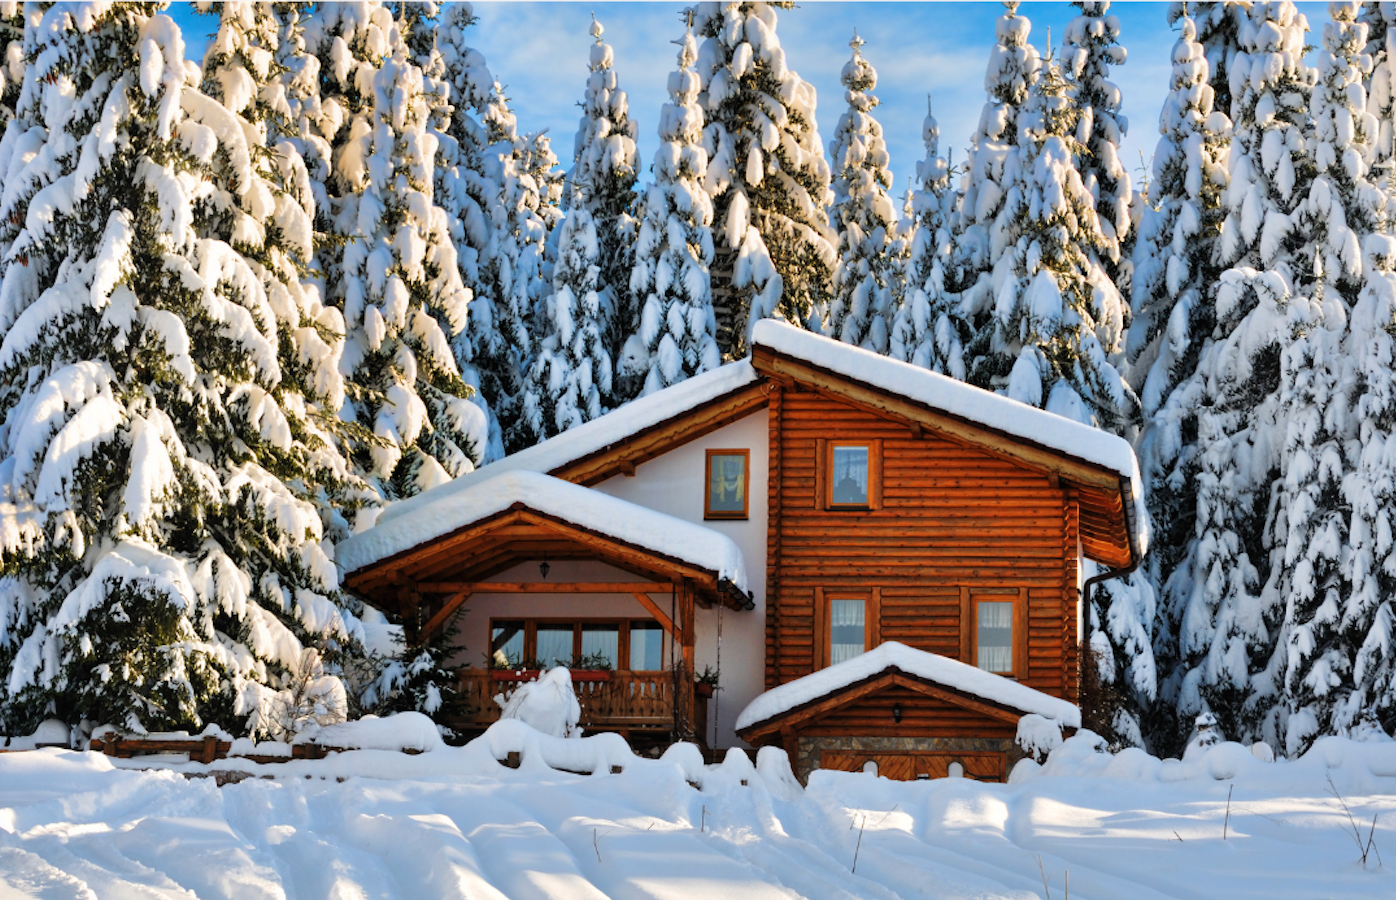 Debunking 5 Myths About Selling Your Home in the Winter